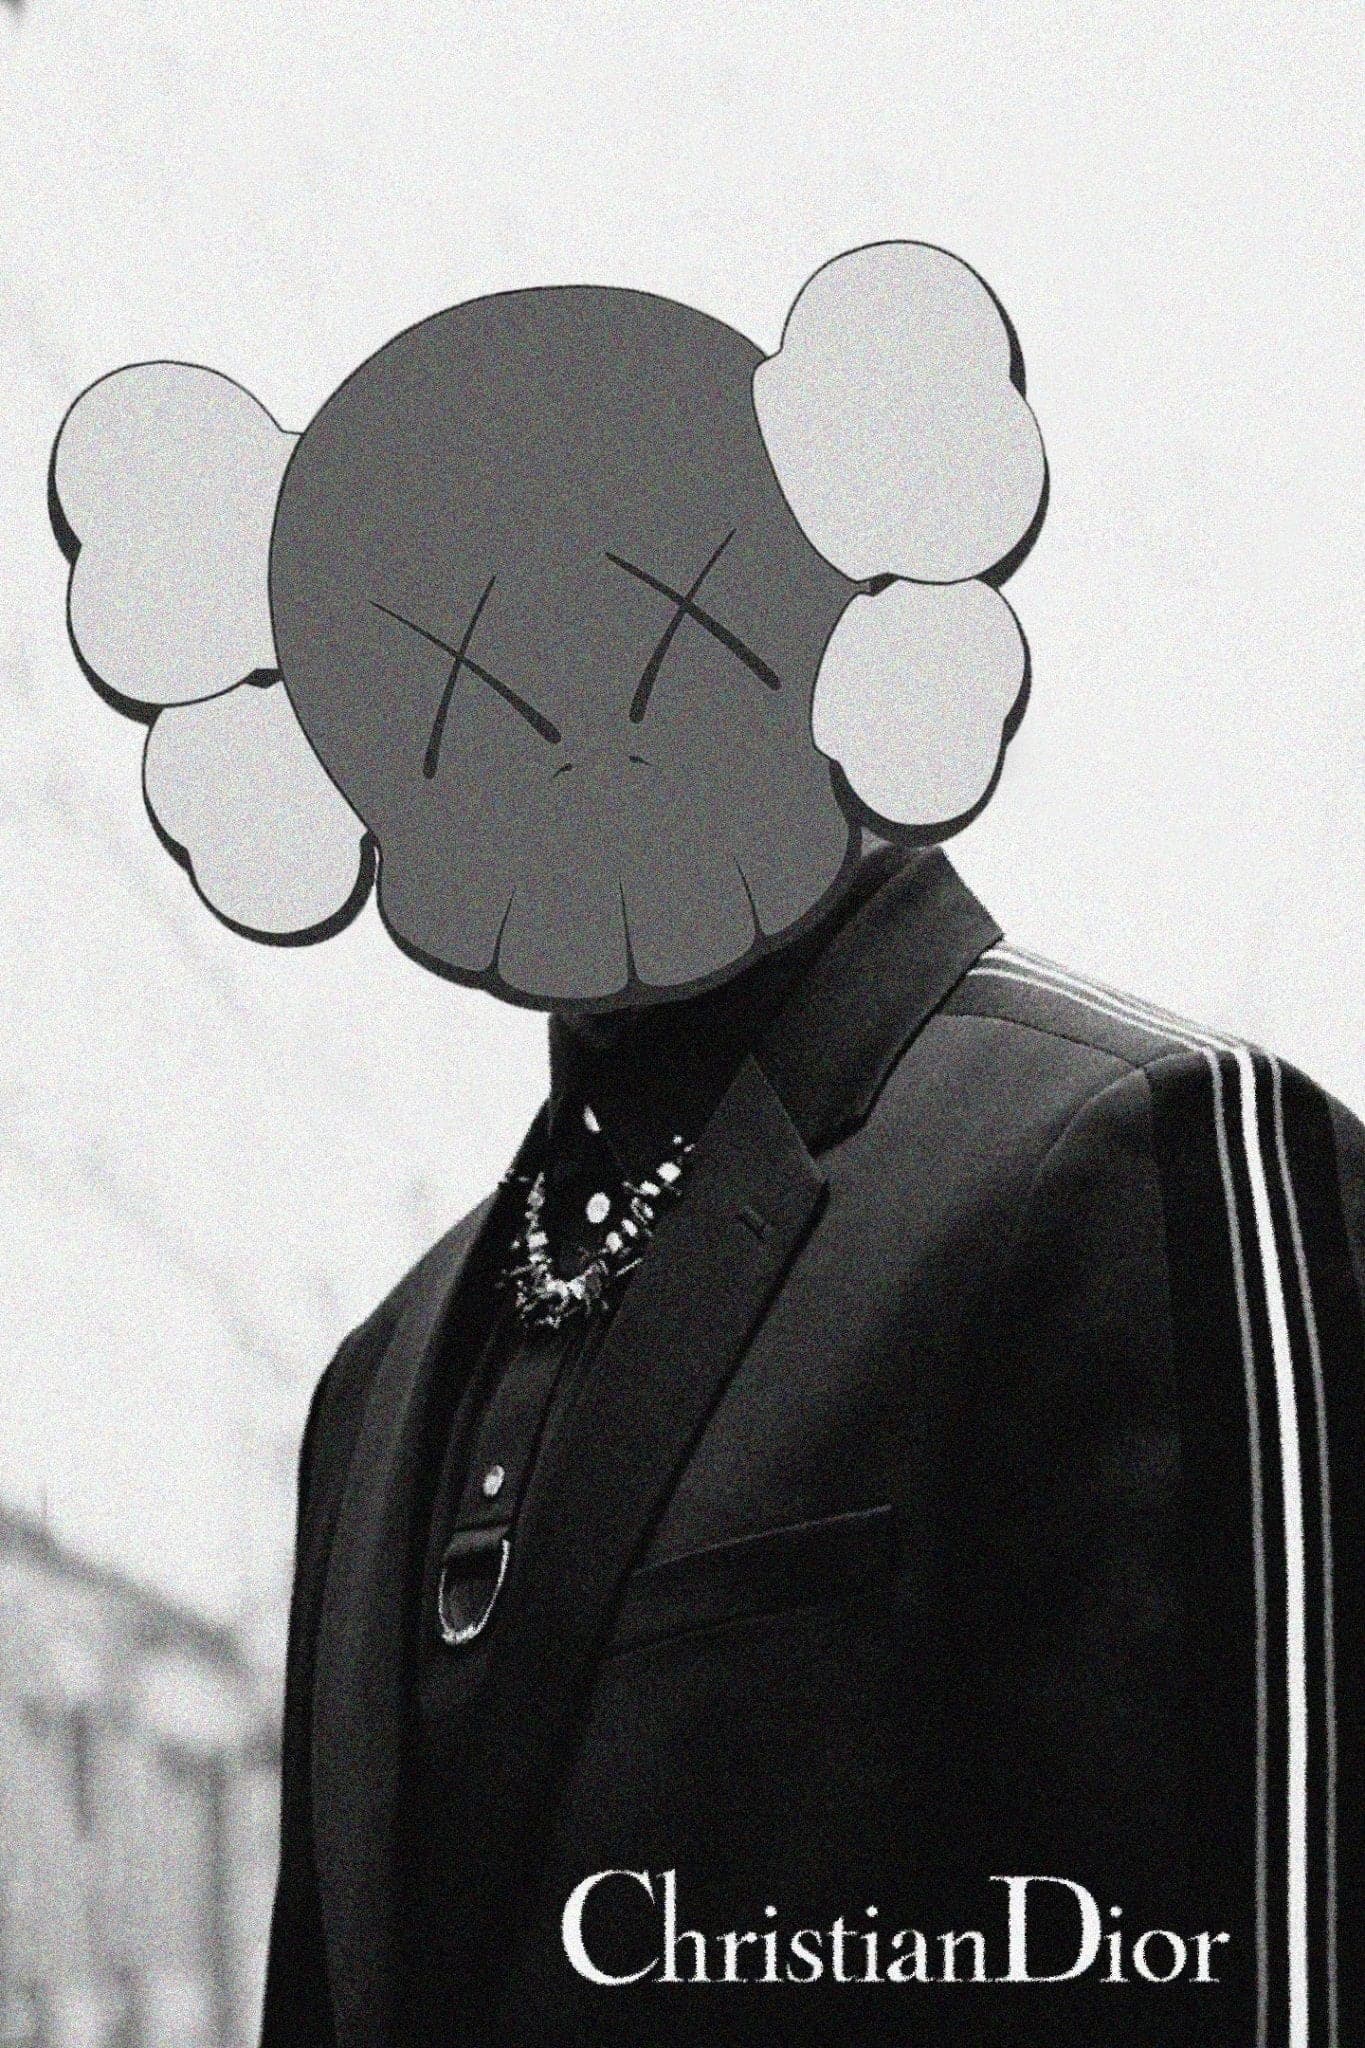 A$AP Rocky x KAWS x Christian Dior ‘Imposter’ Poster - Posters Plug